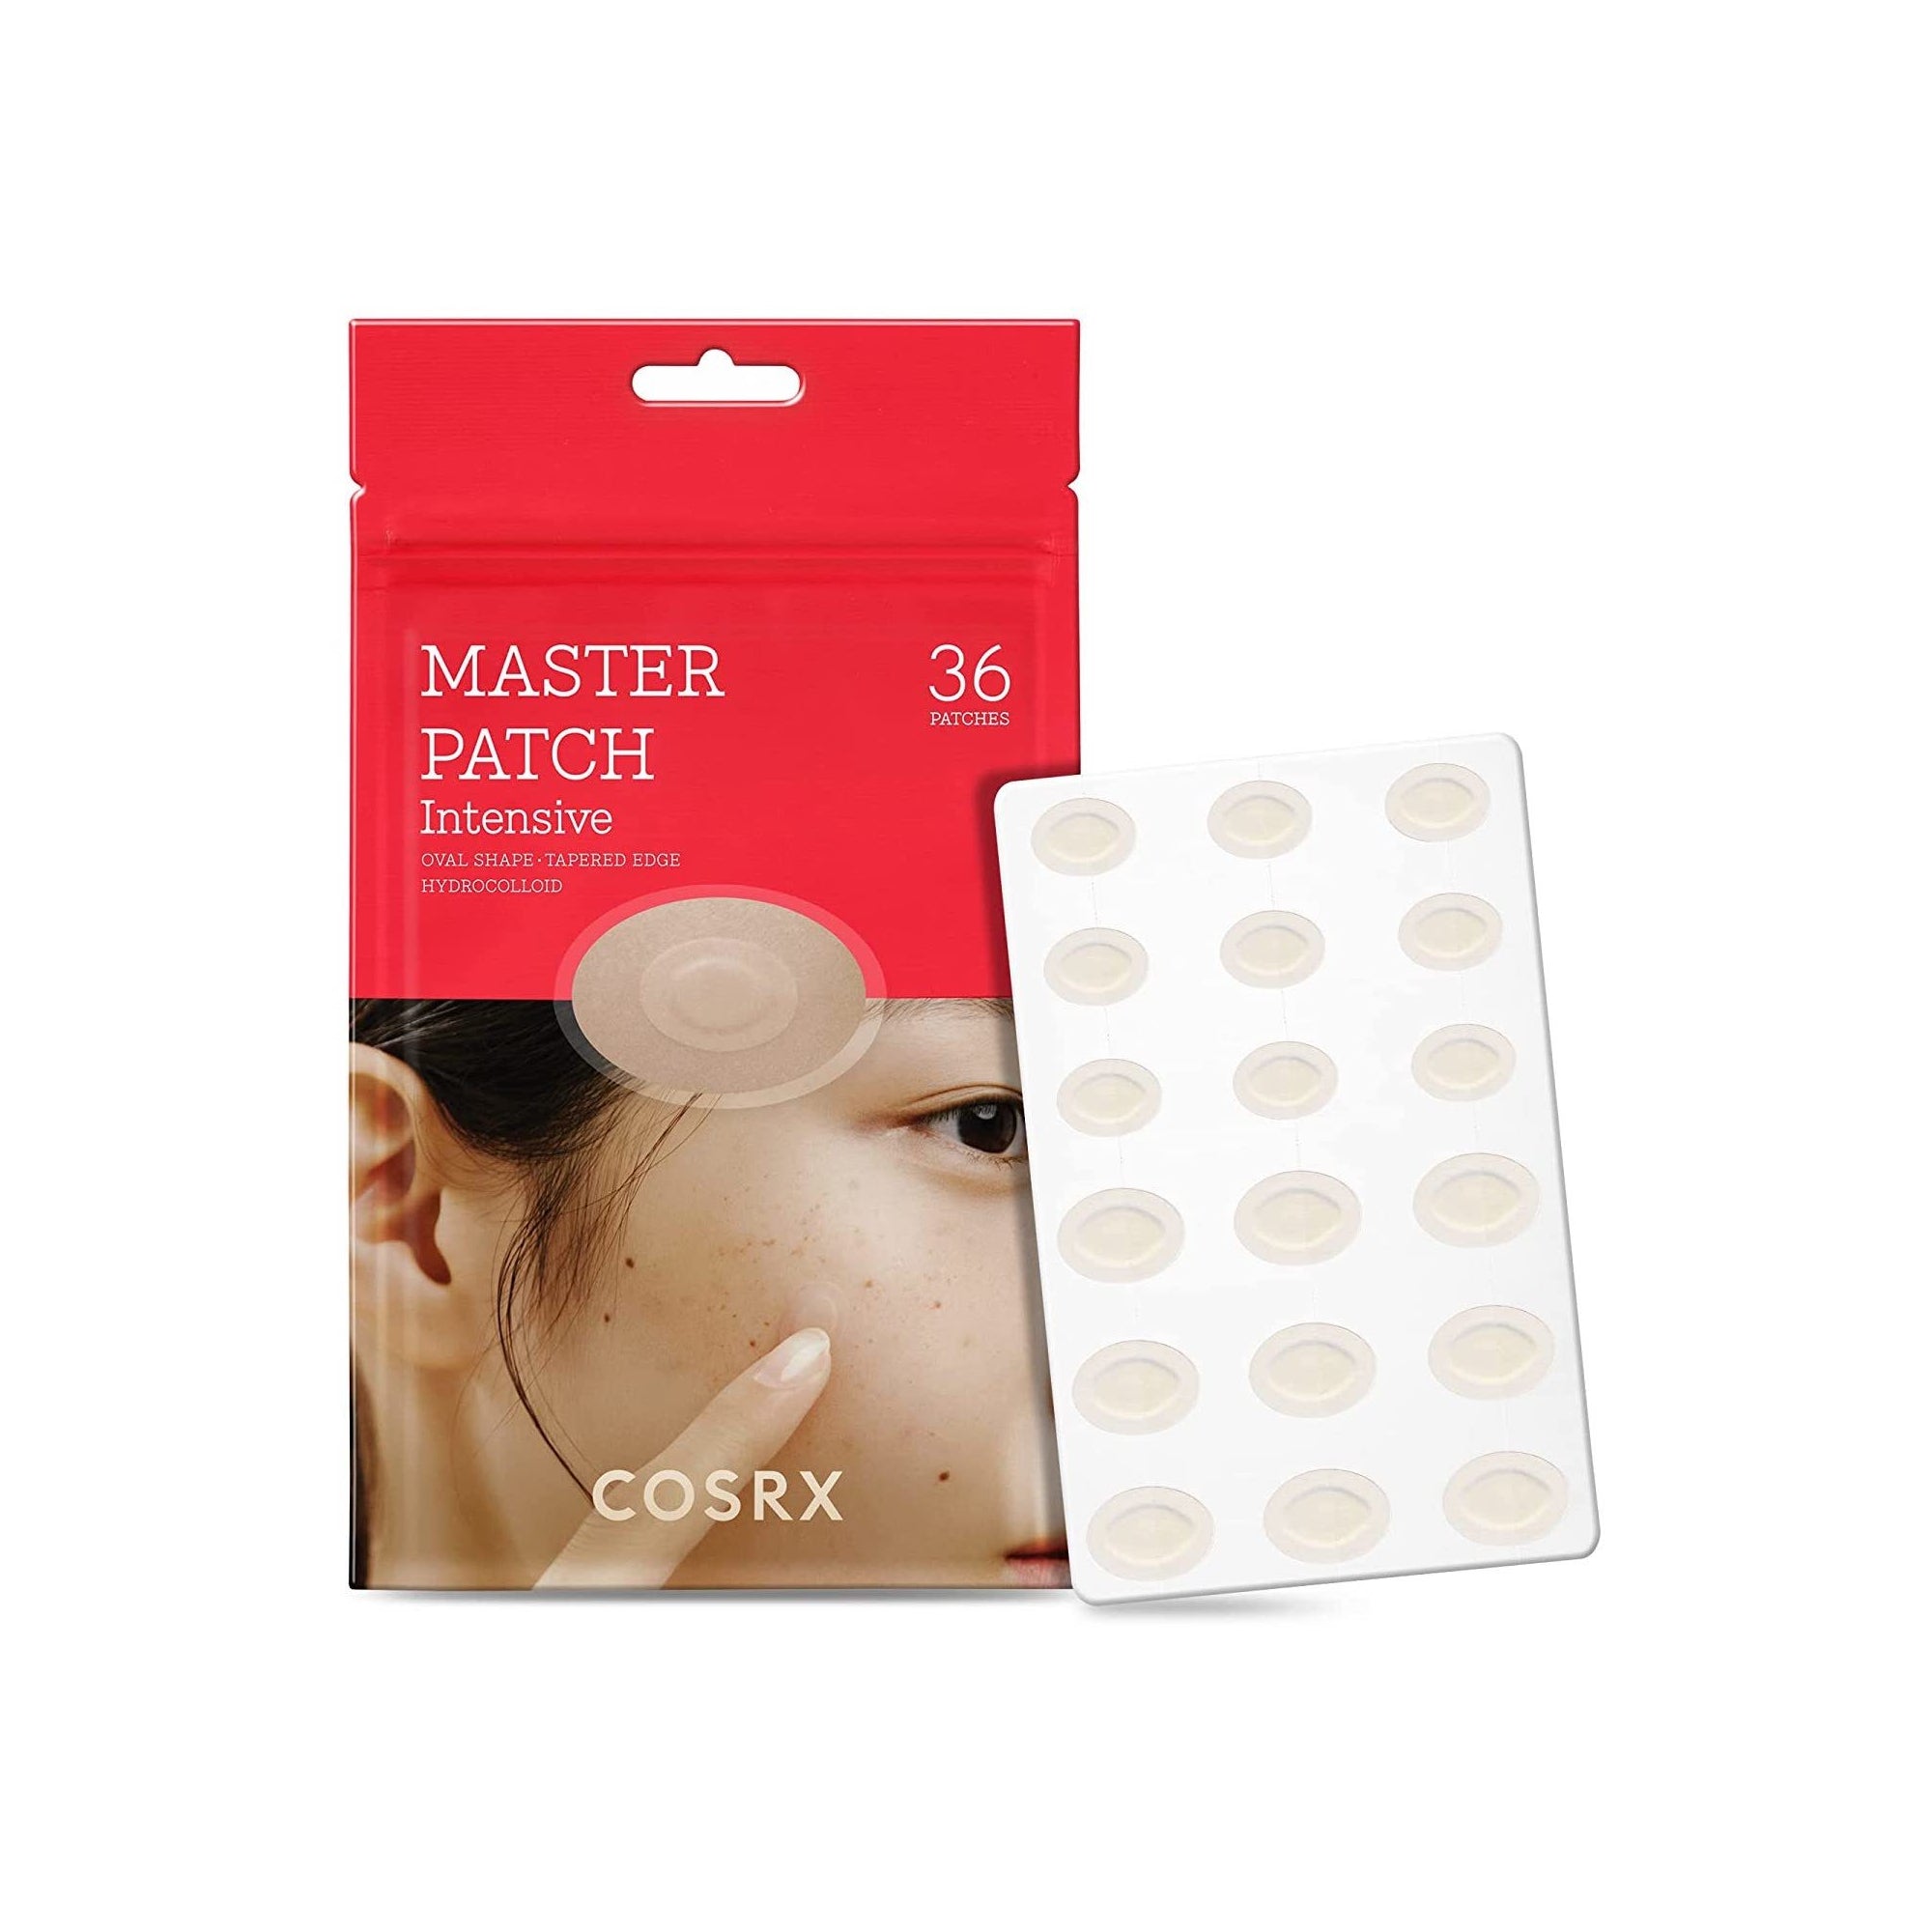 Cosrx Master Patch Intensive Beauty Cosrx 36 Patches  